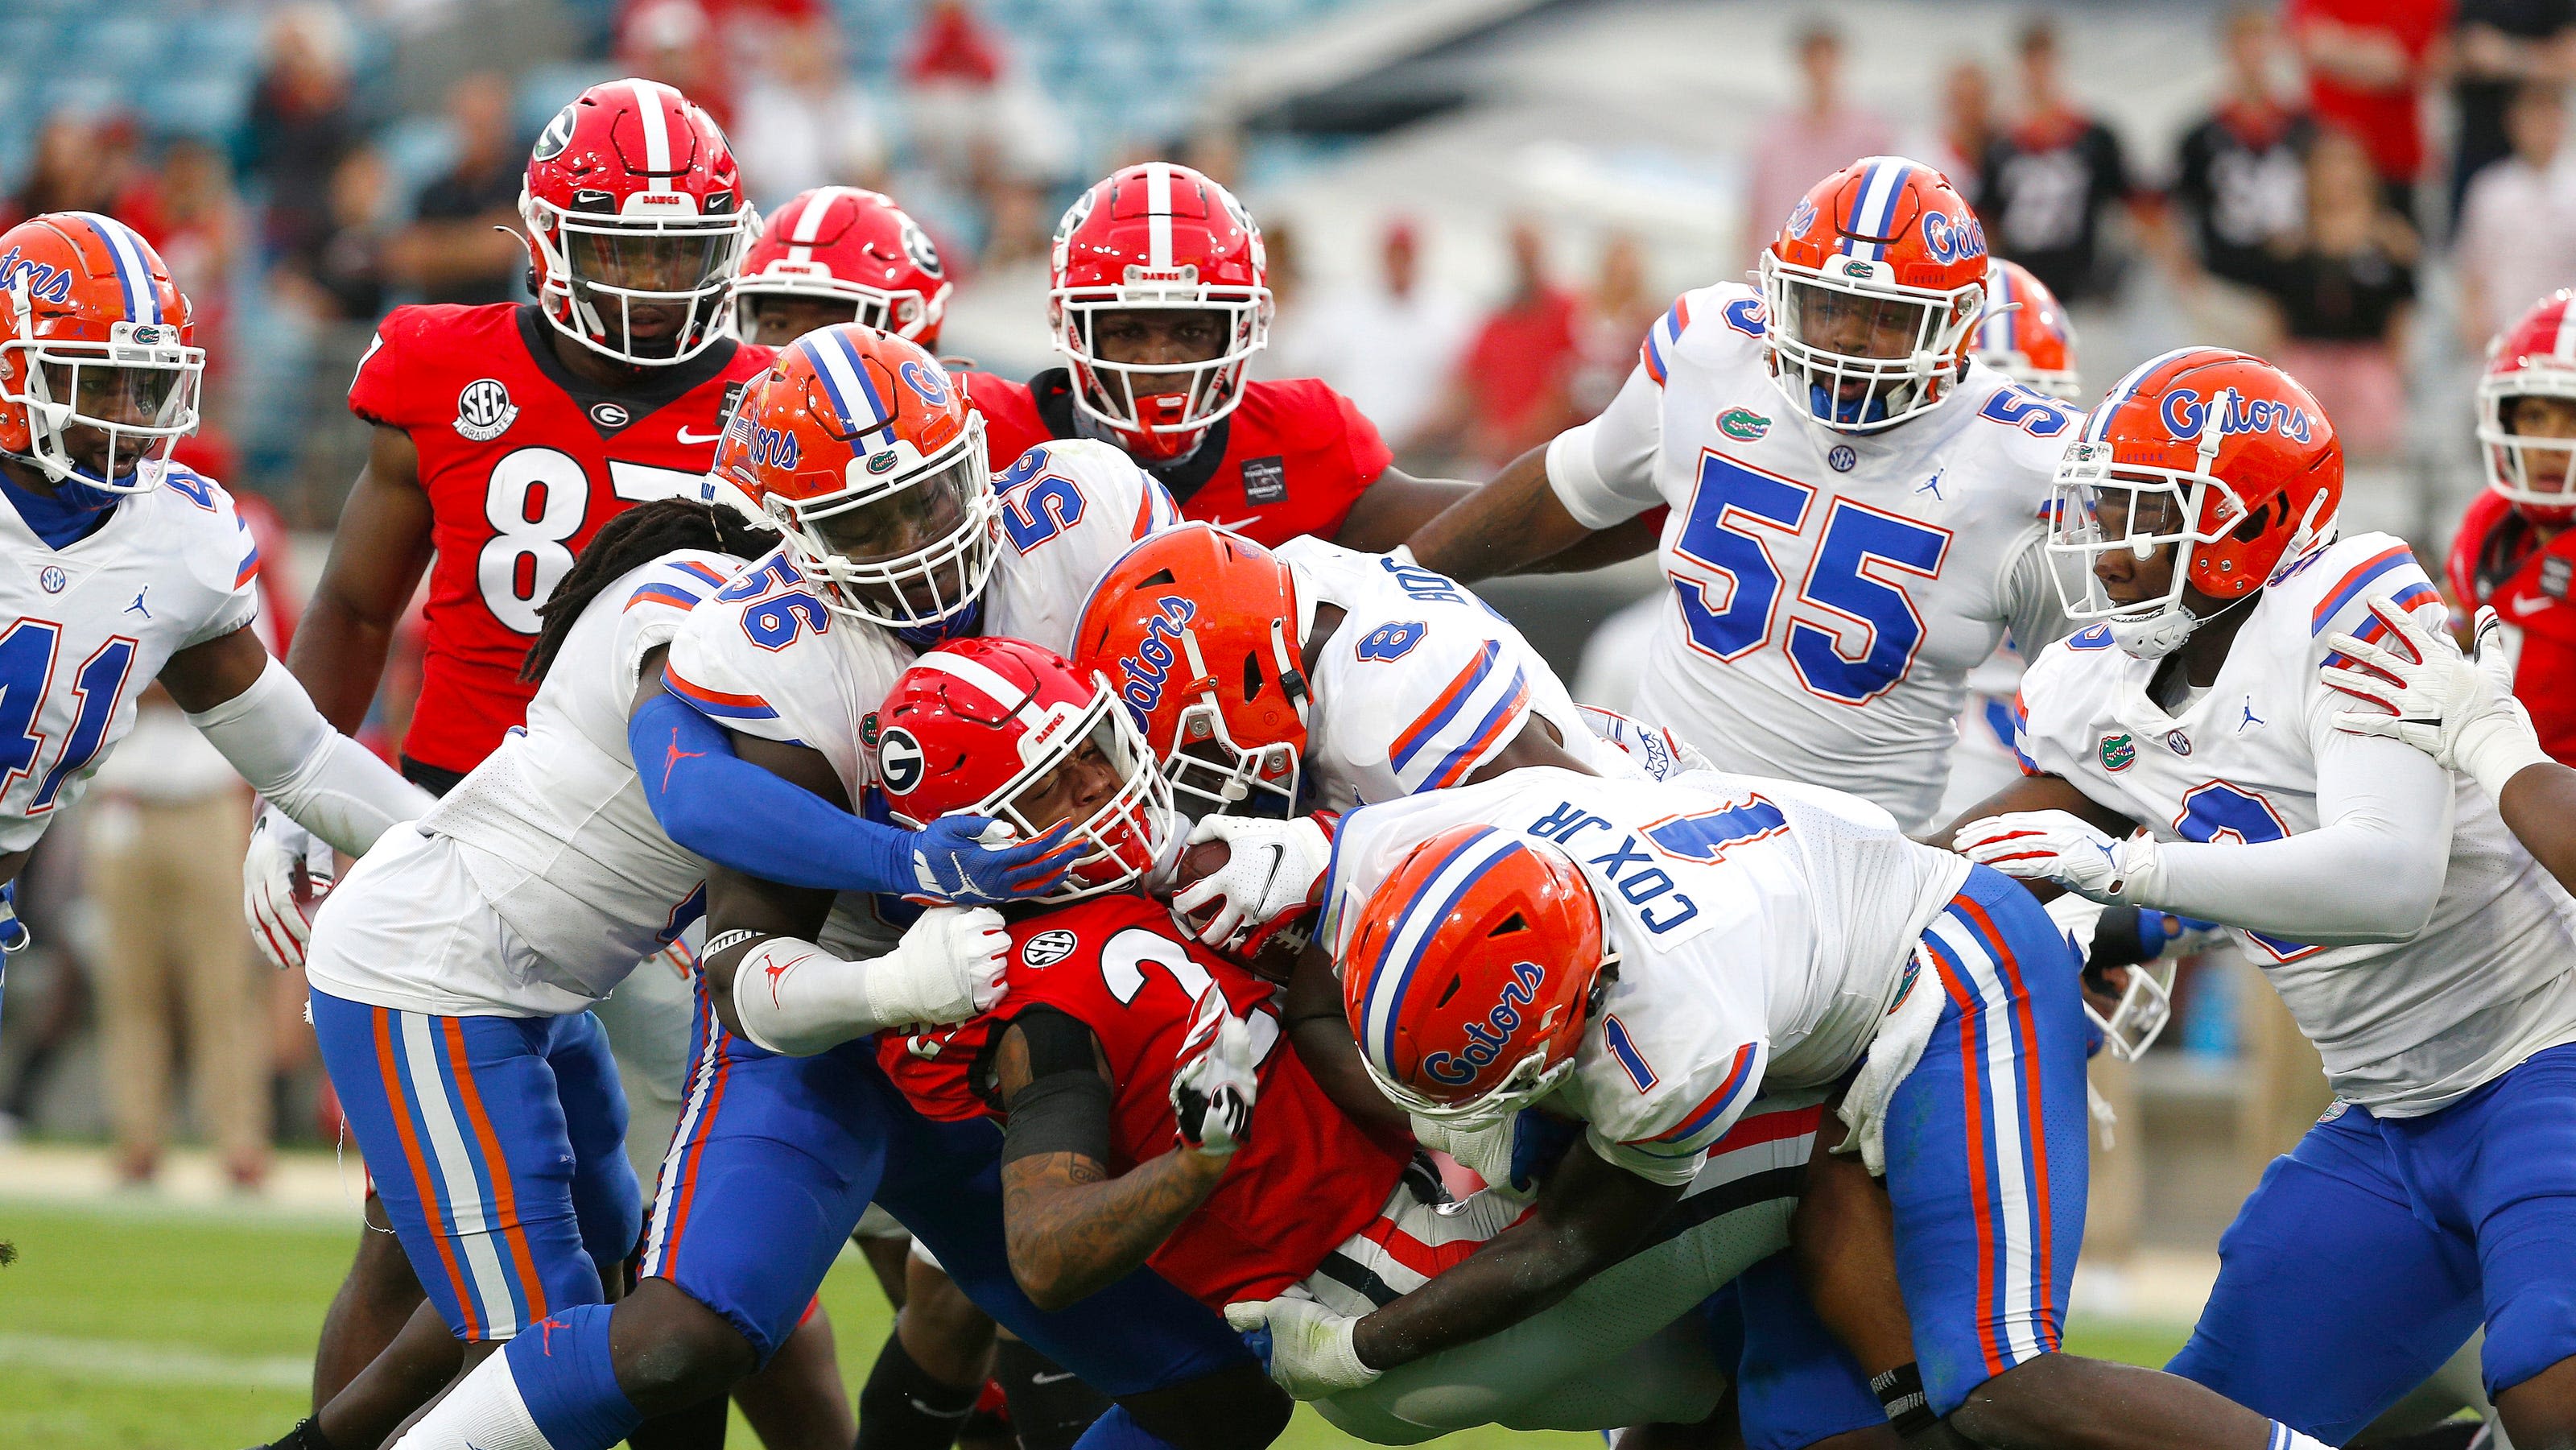 Fan poll: Biggest rival for Florida football. Is it Georgia, FSU or someone else?